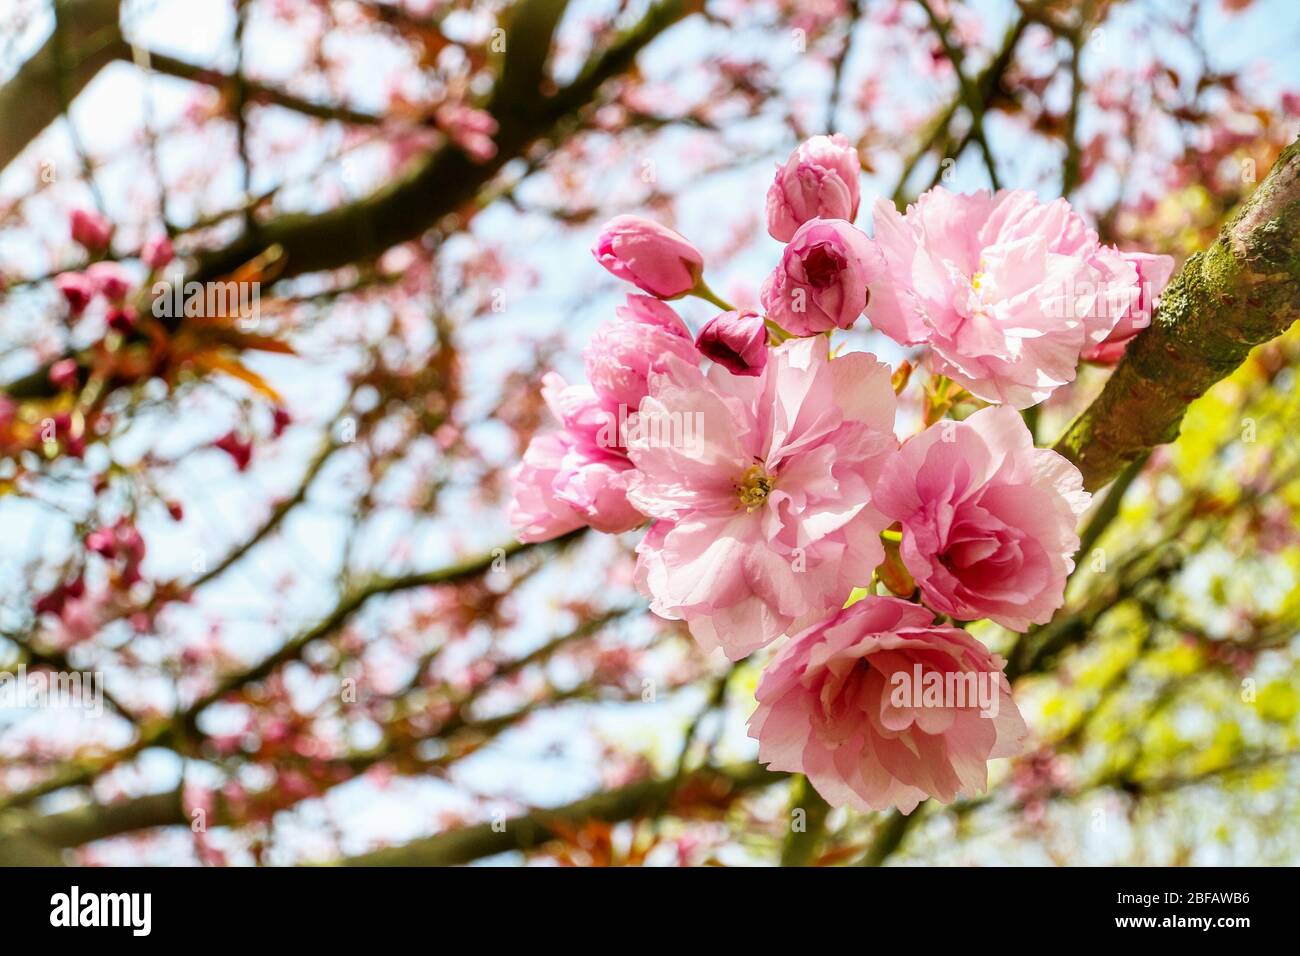 Closeup of the cherry blossom (Sakura) on a Japanese Cherry tree (Prunus serrulata). In Japanese culture, the spring blossom is celebrated as Hanami. Stock Photo